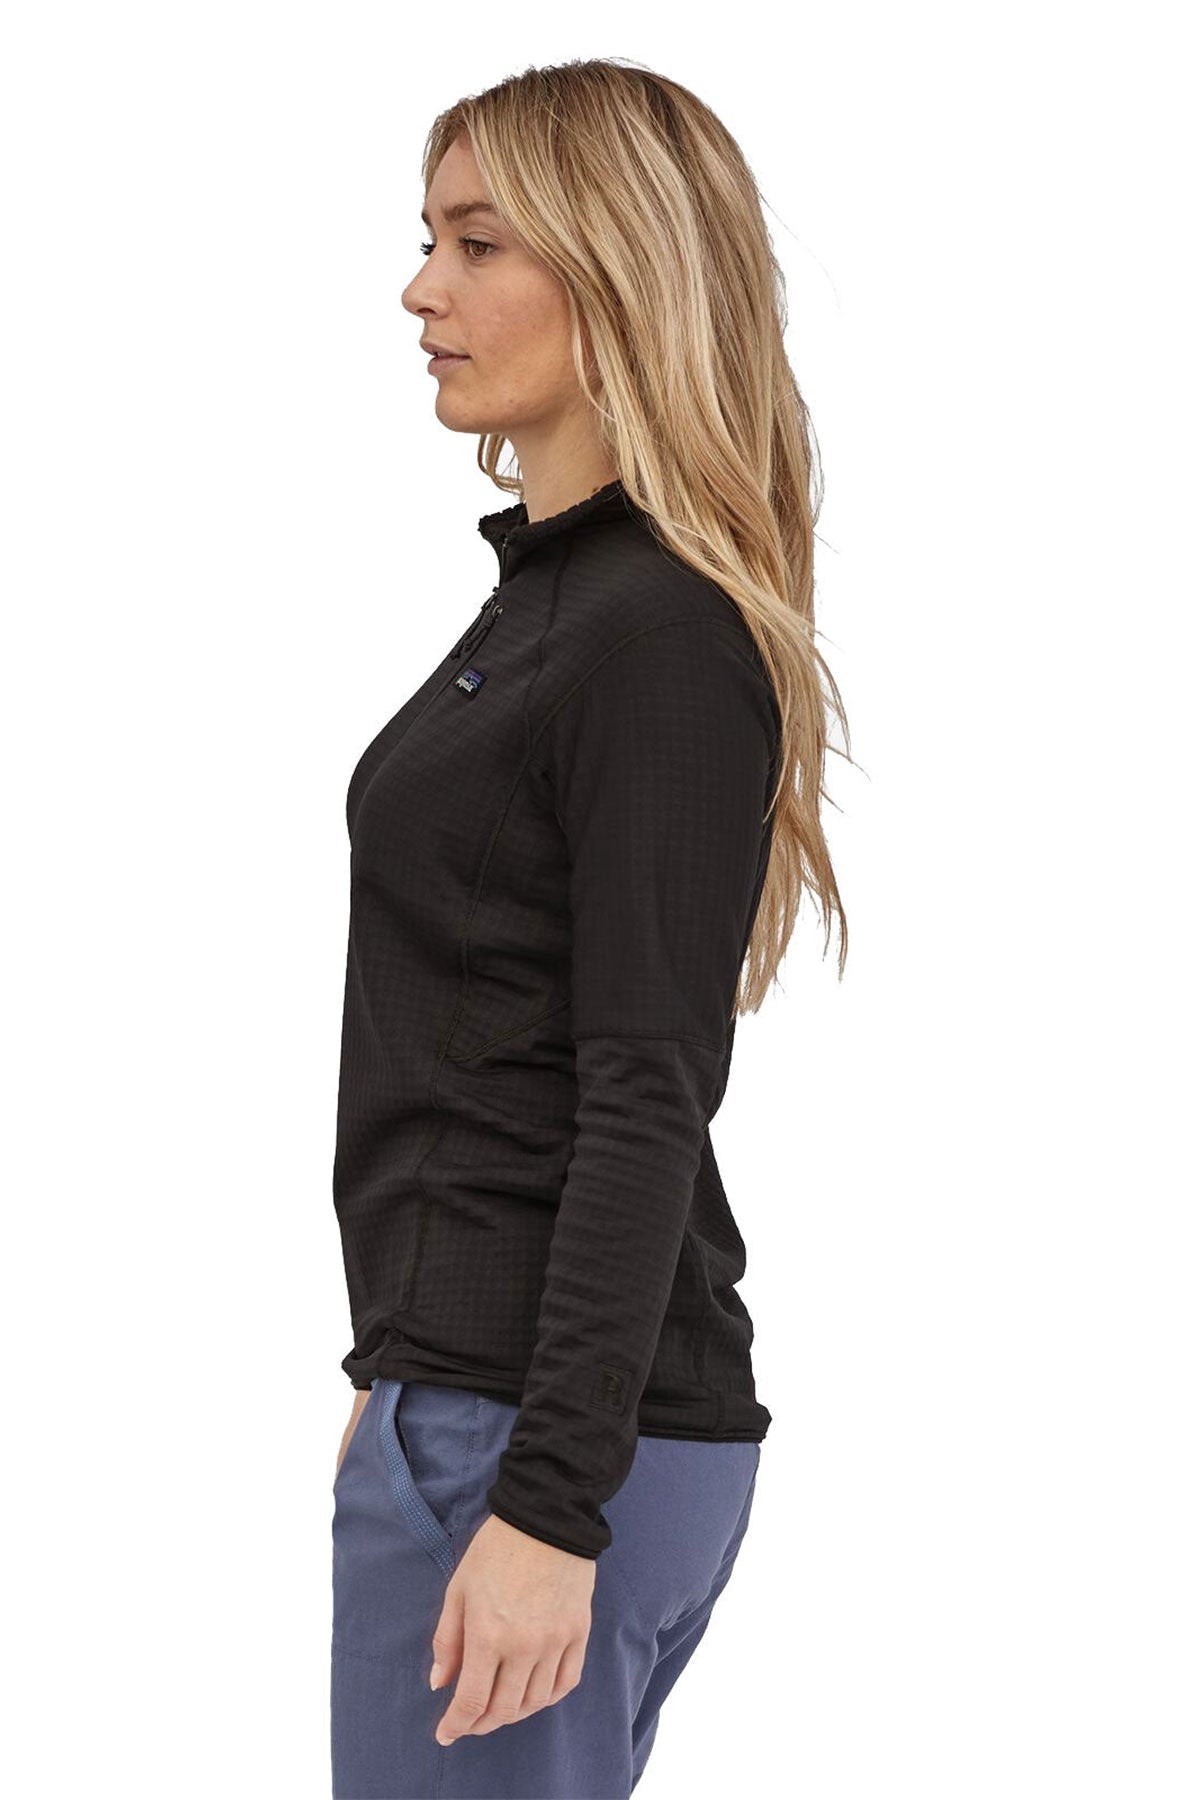 Patagonia Womens R1 Customized Pullovers, Black